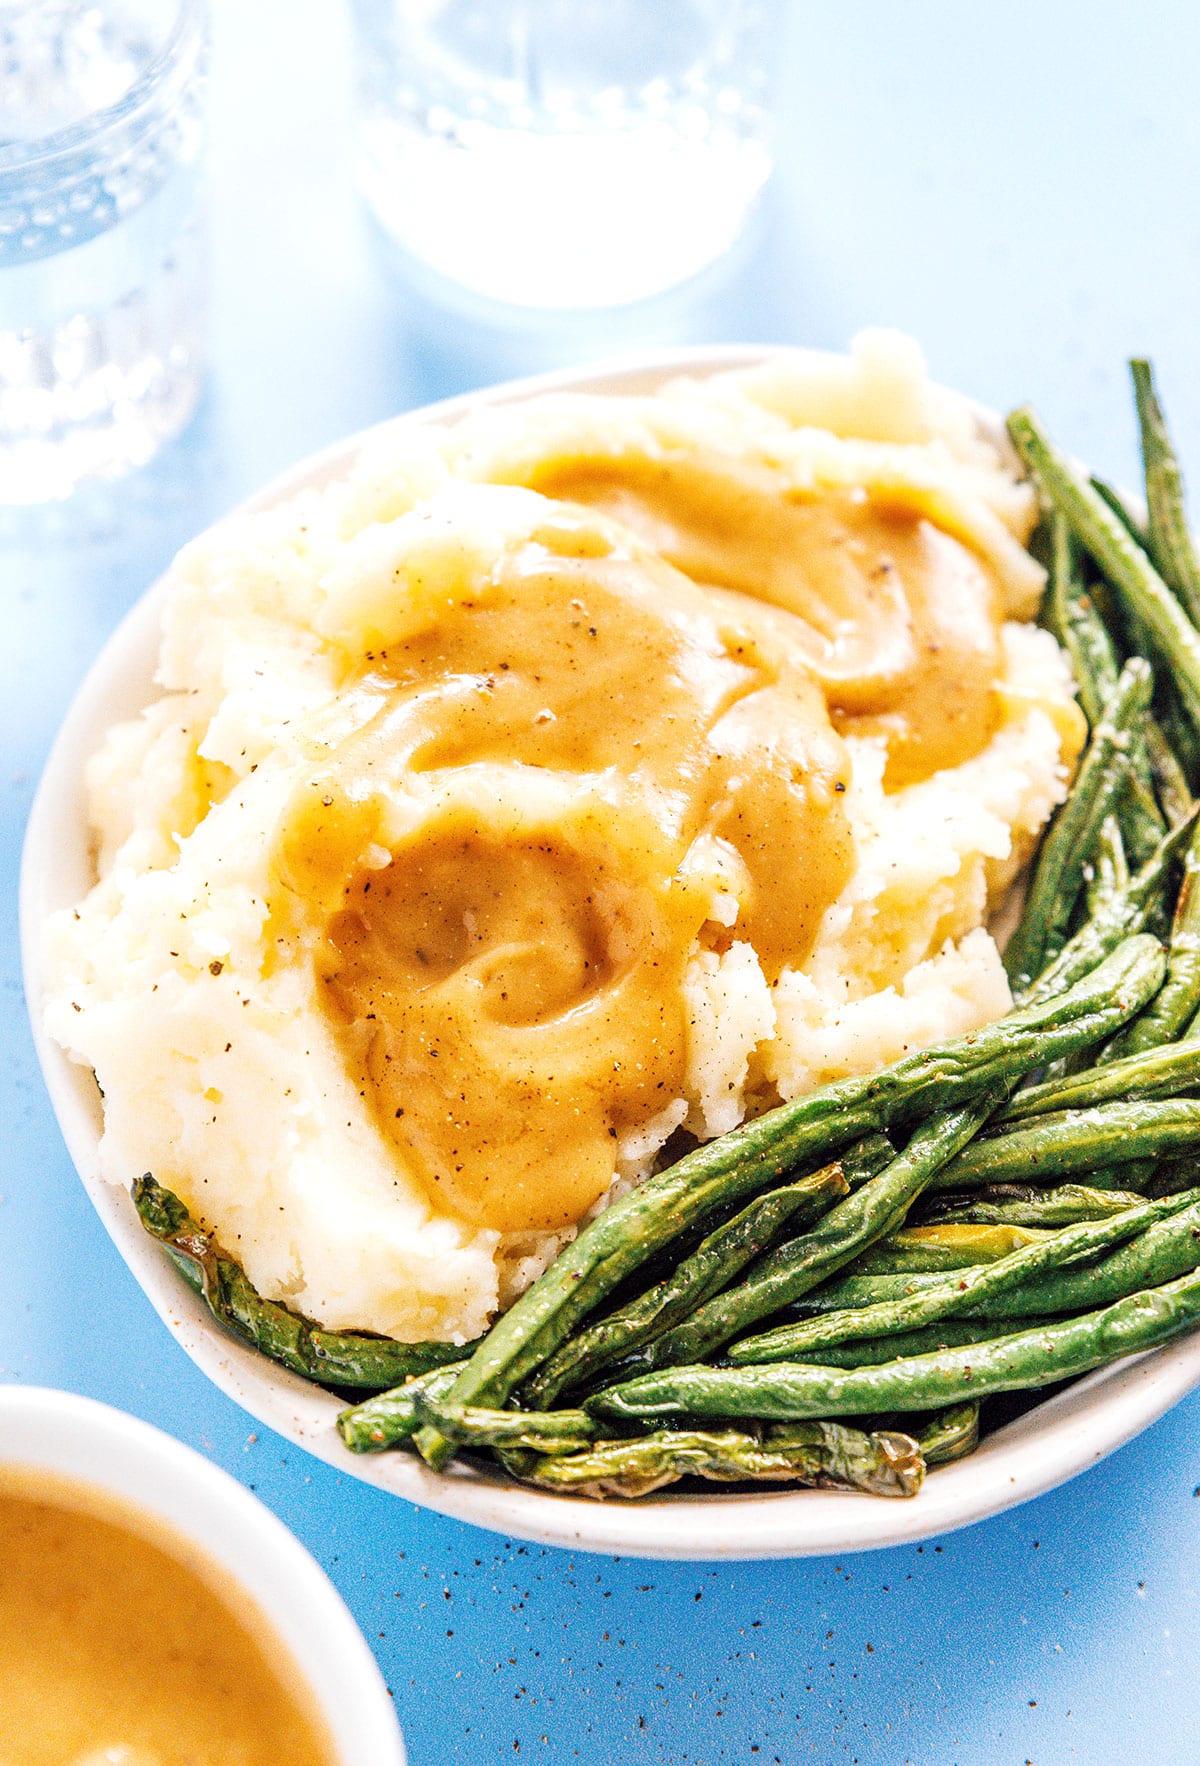 Mashed potatoes with green beans with vegan gravy on top.